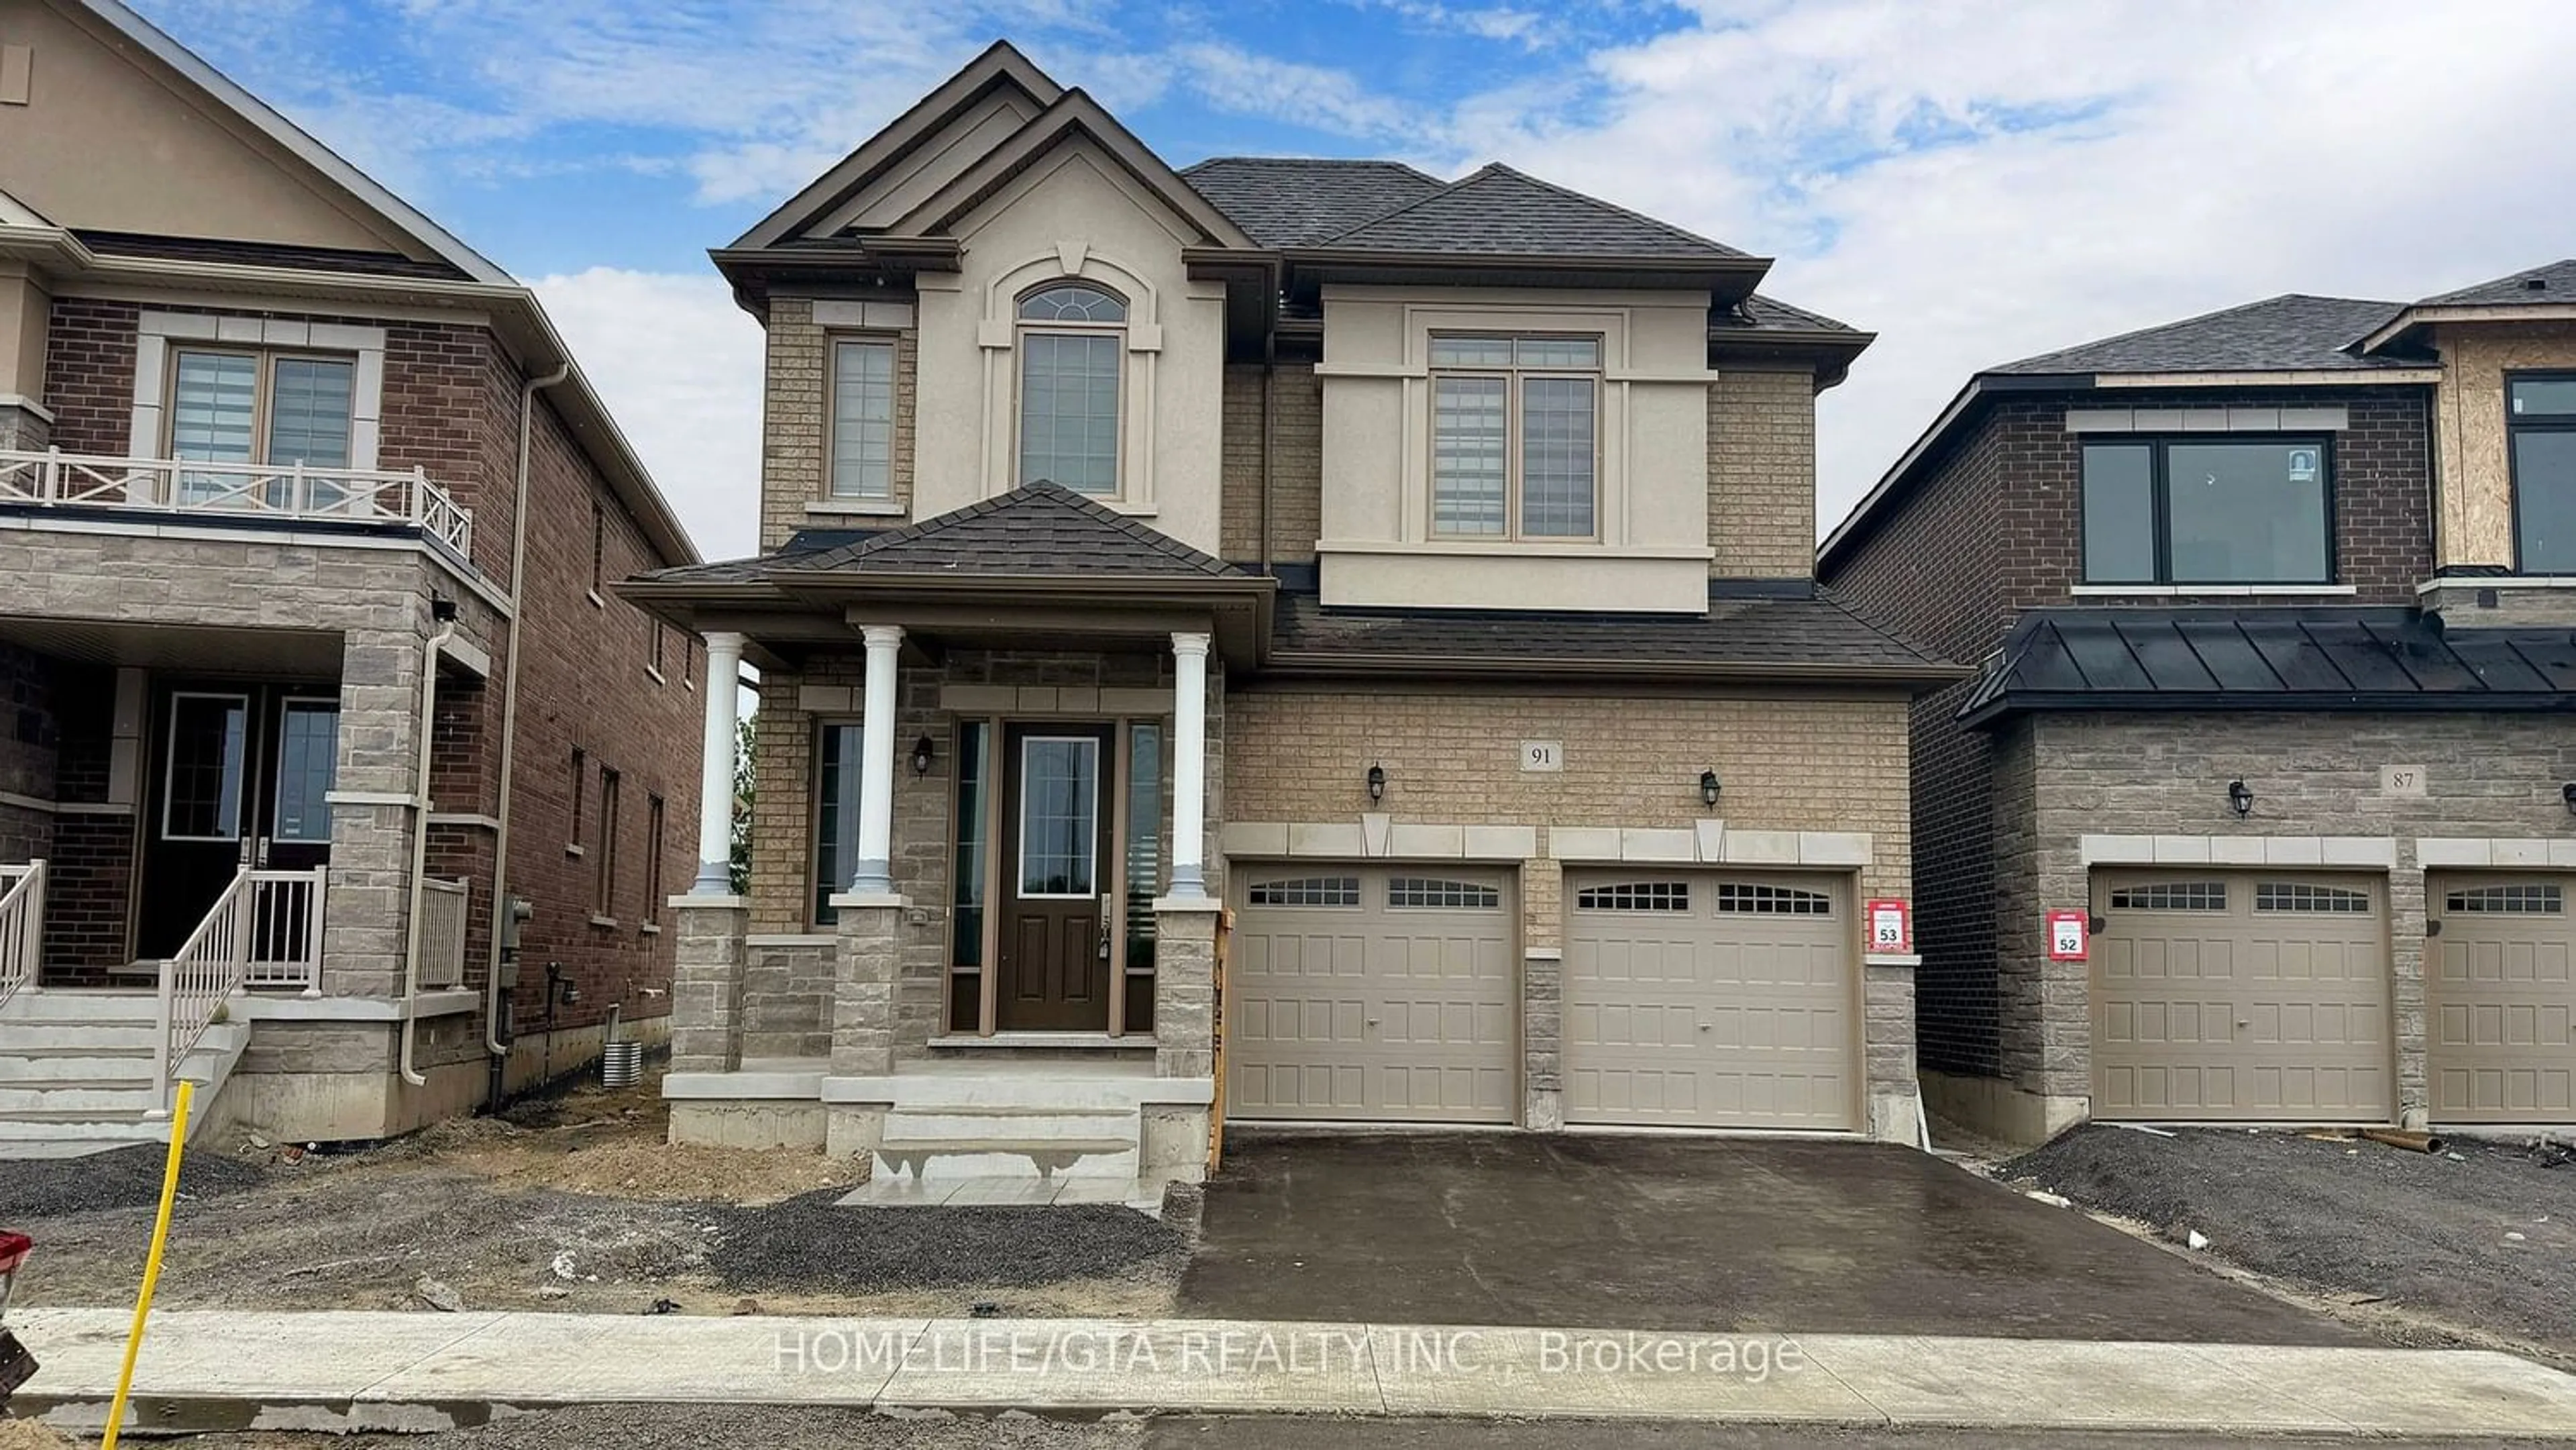 Home with brick exterior material for 91 Hoad St, Clarington Ontario L1B 0W4